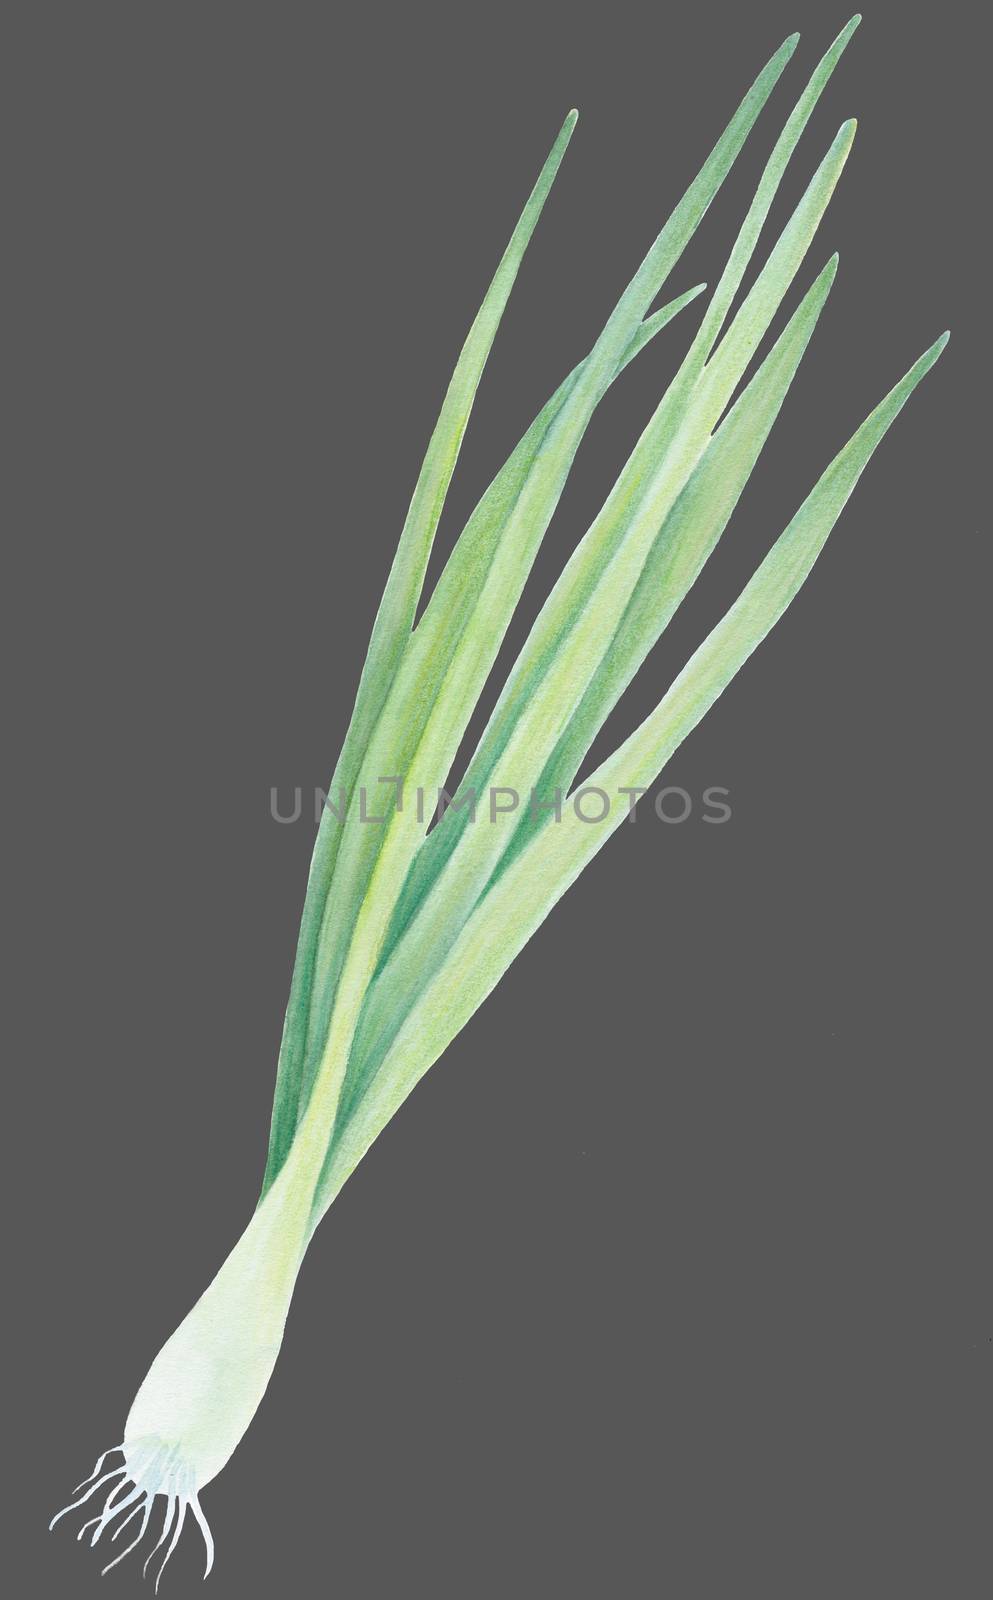 Fresh Spring Green onion isolated on grey background. Watercolor realistic botanical art. Hand drawn illustration. For logo, packaging, print, organic food, market store market, diet menu. by sshisshka